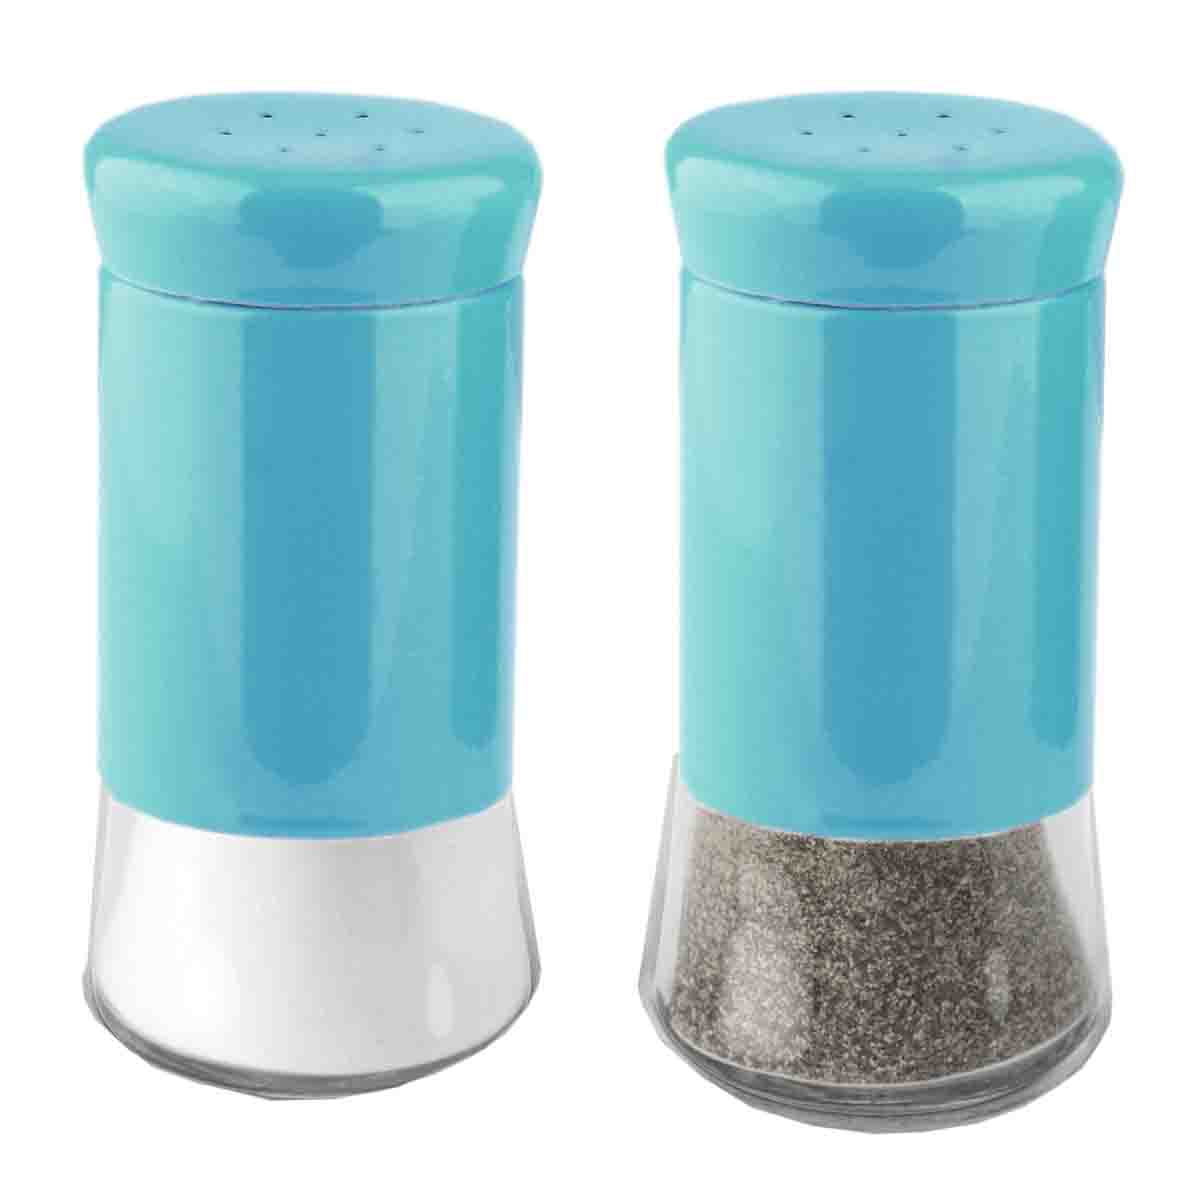  Bivvclaz Turquoise Salt and Pepper Shakers Set - Turquoise Kitchen  Decor & Teal Kitchen Accessories for Home Restaurants Wedding - Cute Modern  Farmhouse Glass Salt and Pepper Set, Easy to Clean